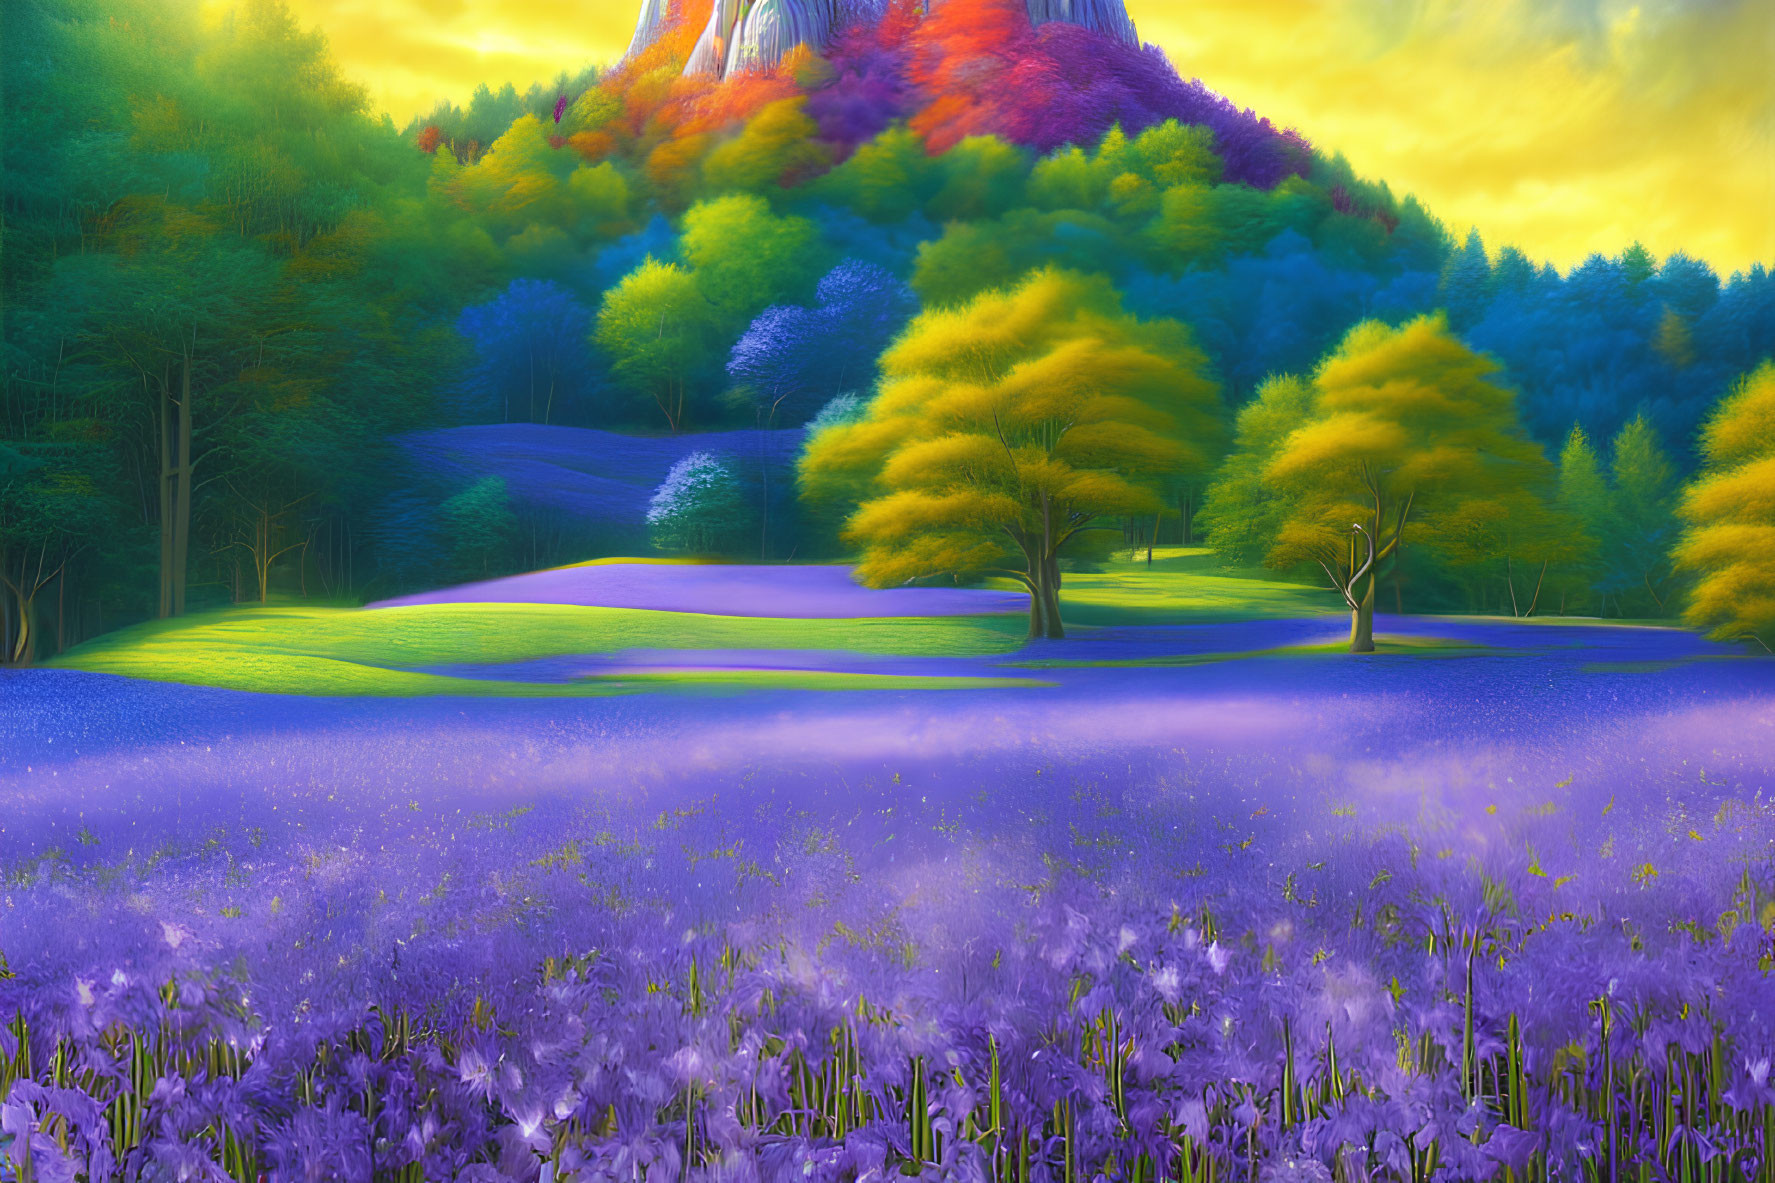 Colorful Landscape with Purple Flowers, Trees, and Mountain under Yellow Sky